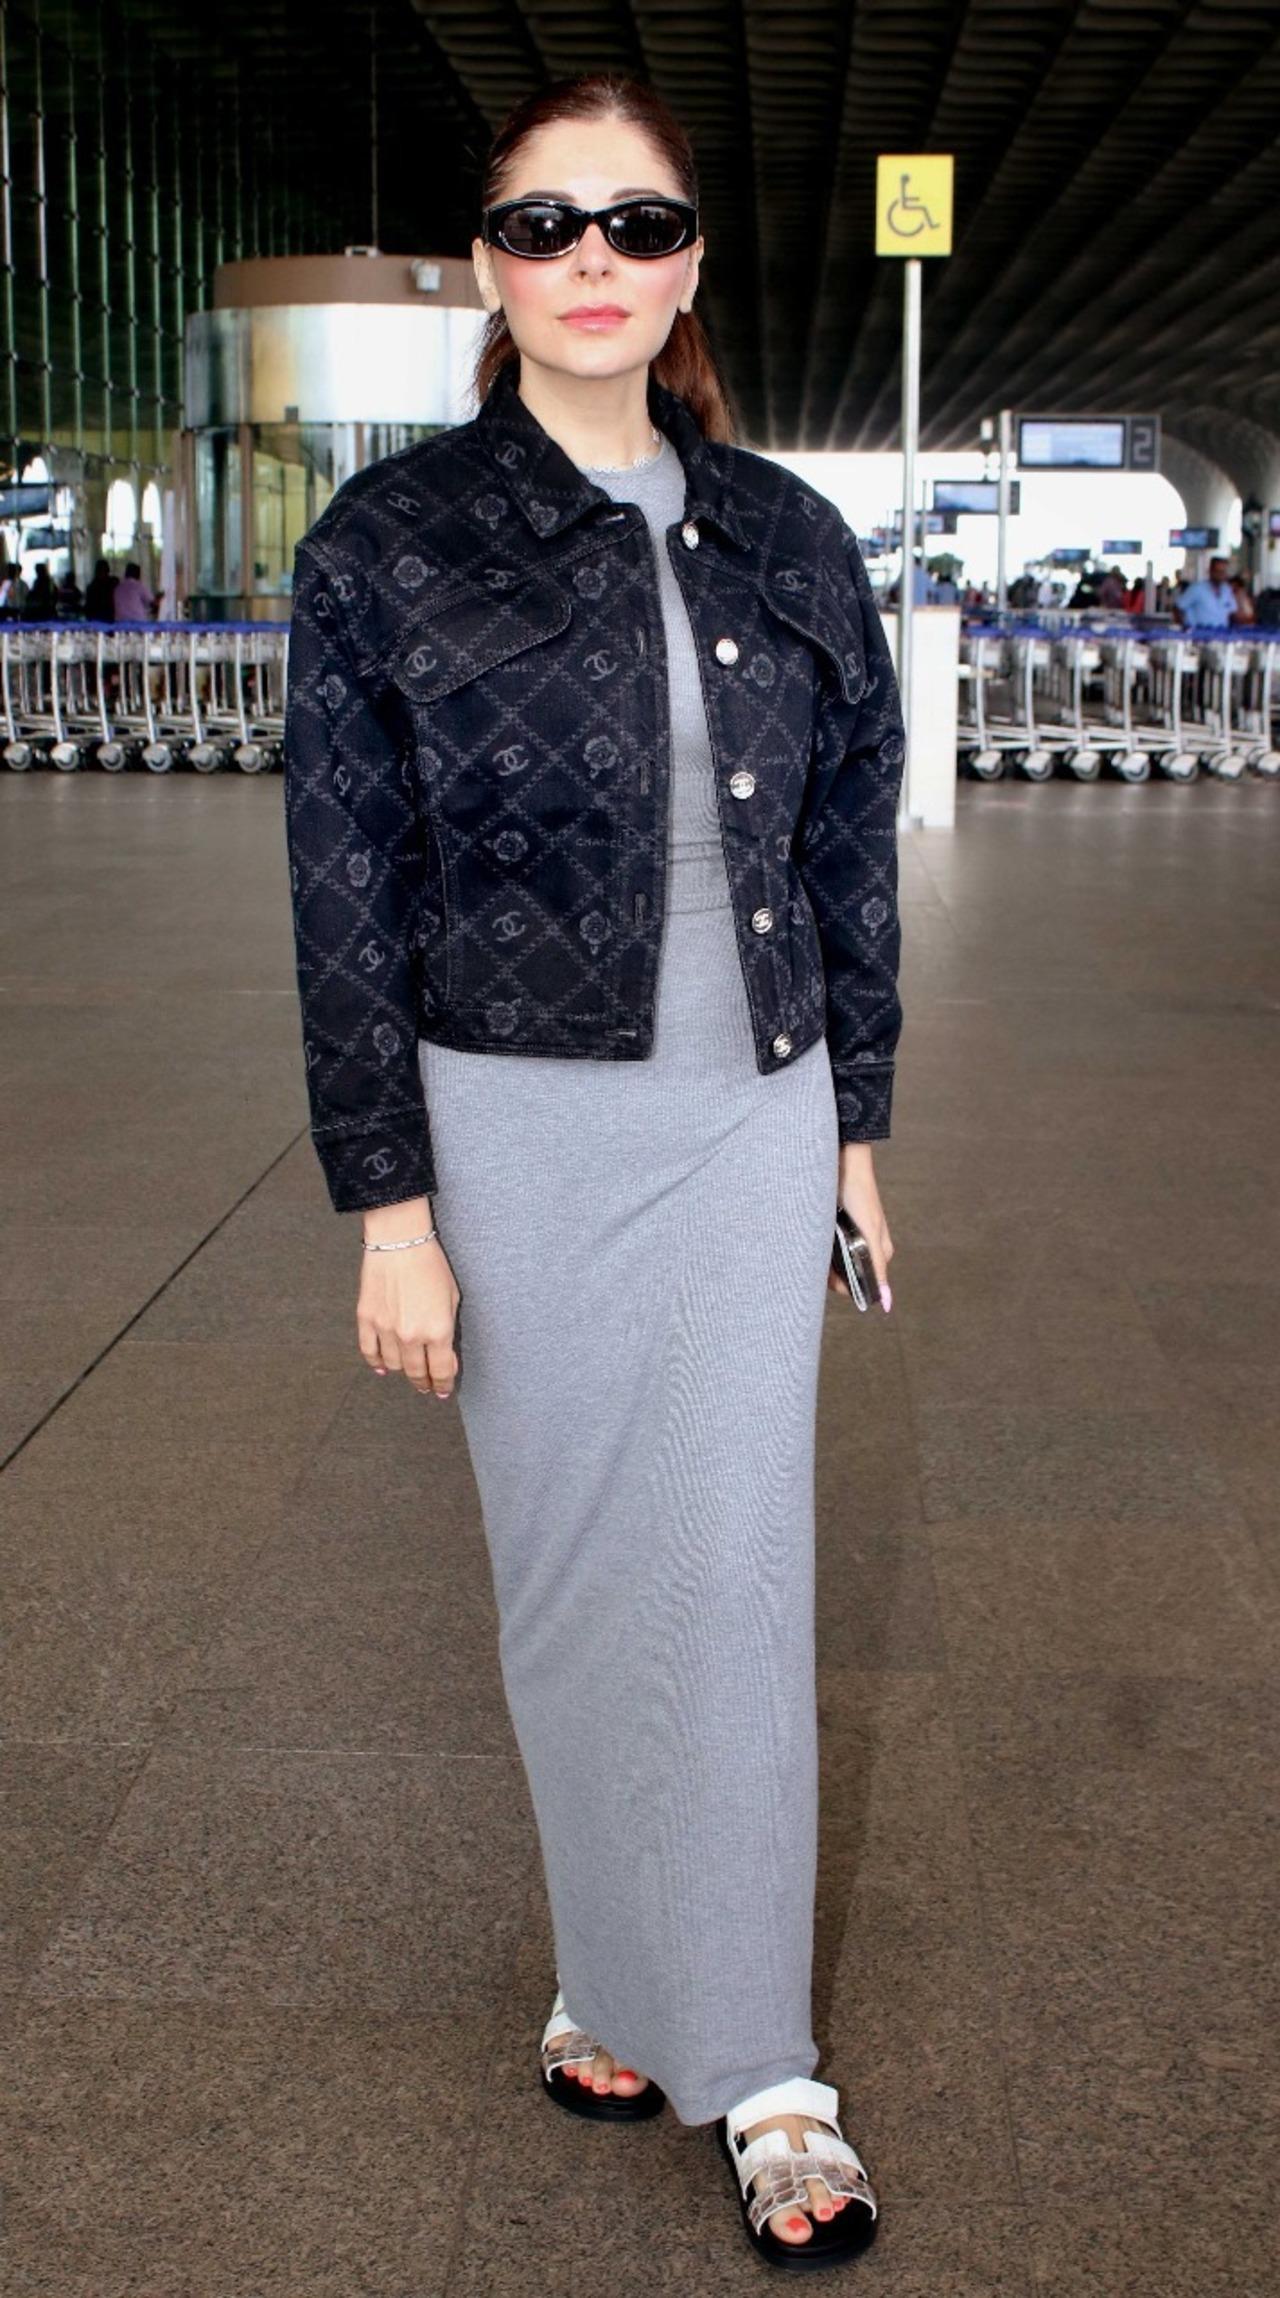 Kanika Kapoor was spotted at the airport, wearing a cool grey dress paired with black jacket